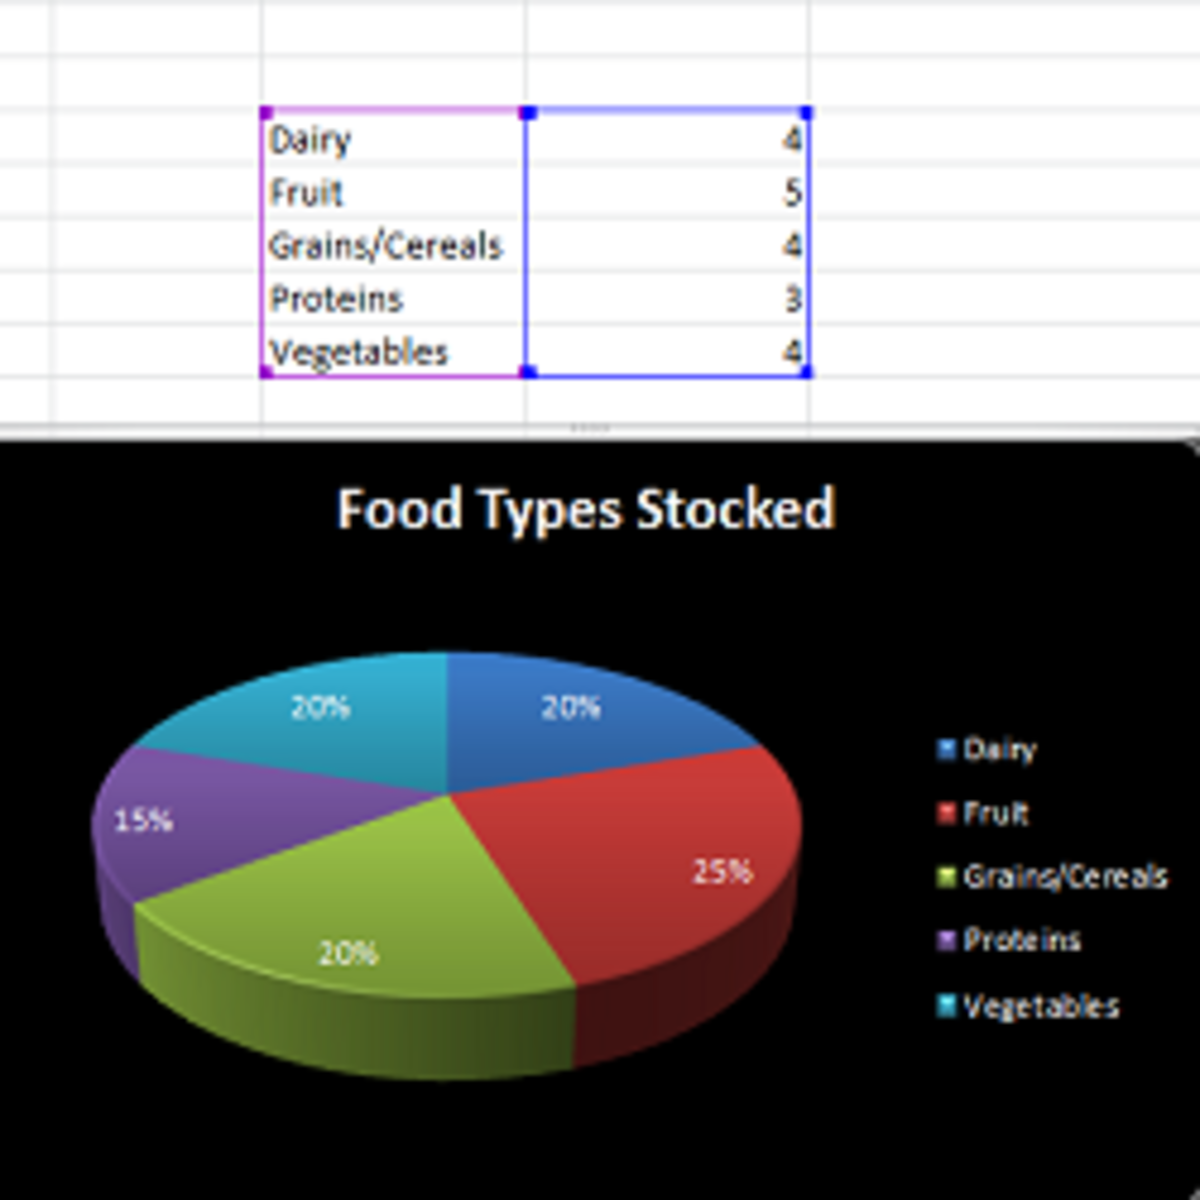 How to Count Items and Make Pie Charts in Microsoft Excel